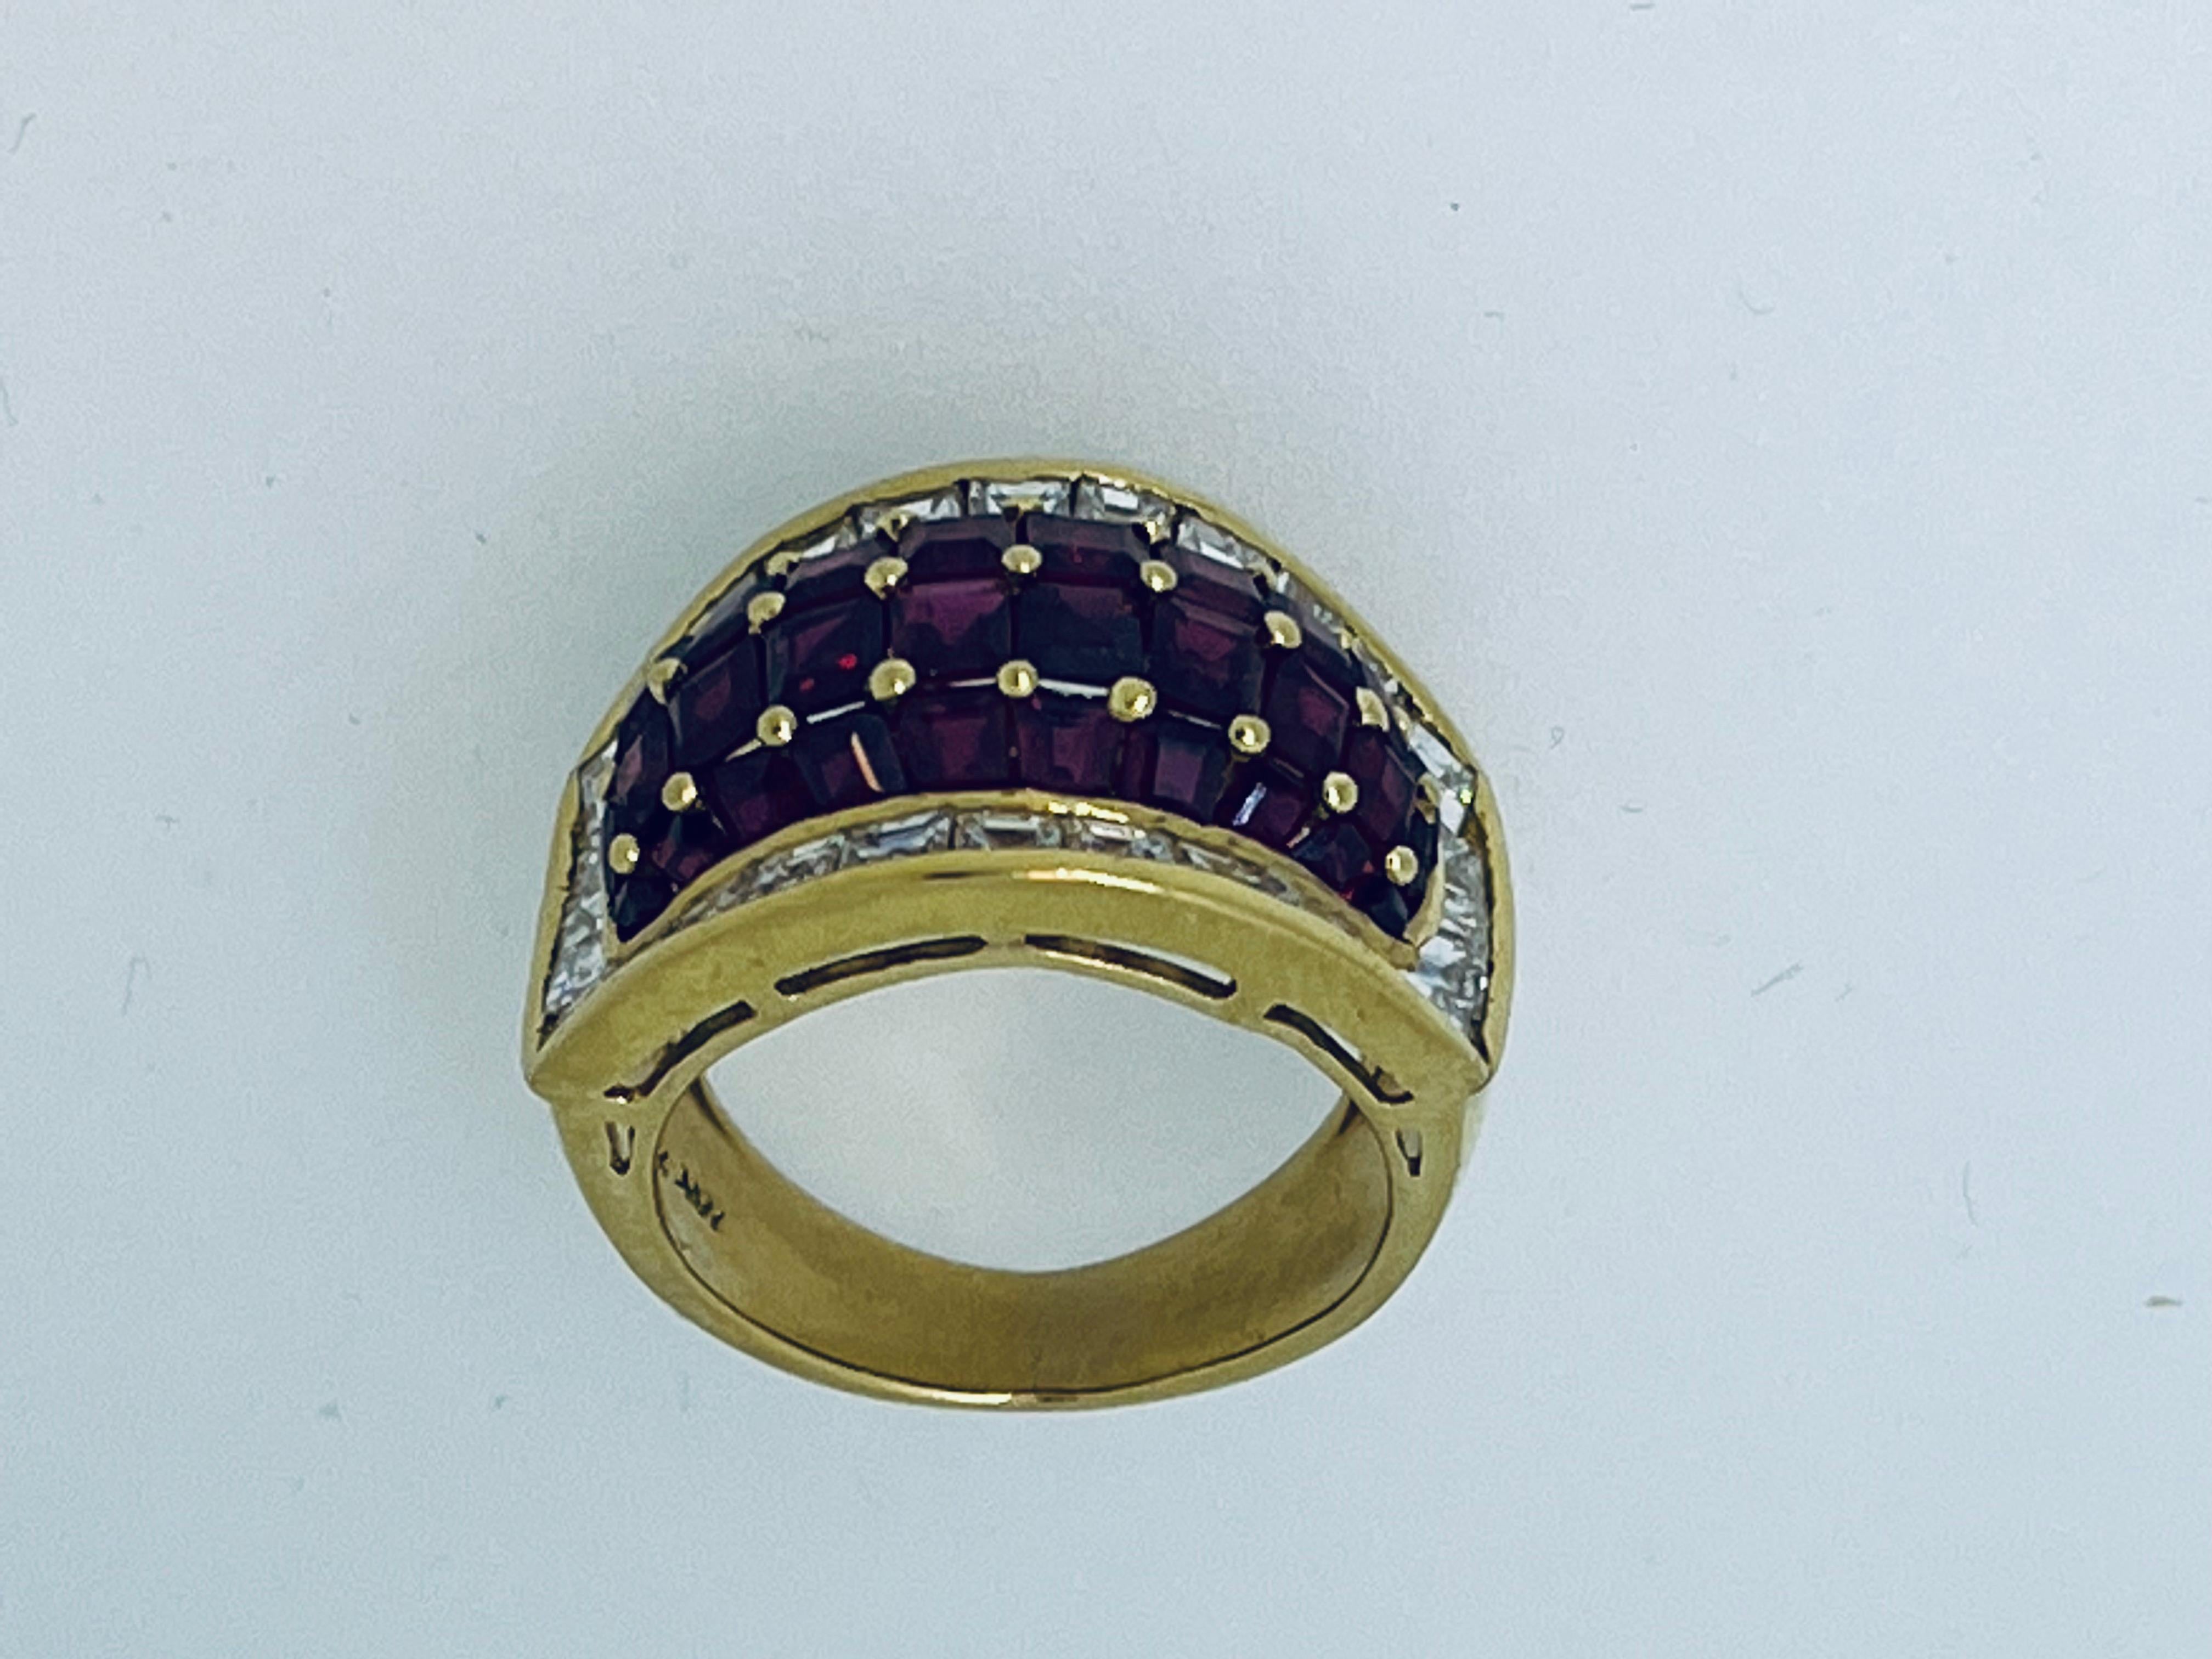 The central domed section set with square cut rubies surrounded by square cut diamonds. Diamond weight approximately 1.40ct. Ruby weight approximately 5ct. Weight: 9.7 grammes. Italian manufacture, circa 1990. Ring is resizable. Size is: K1/4 (UK),